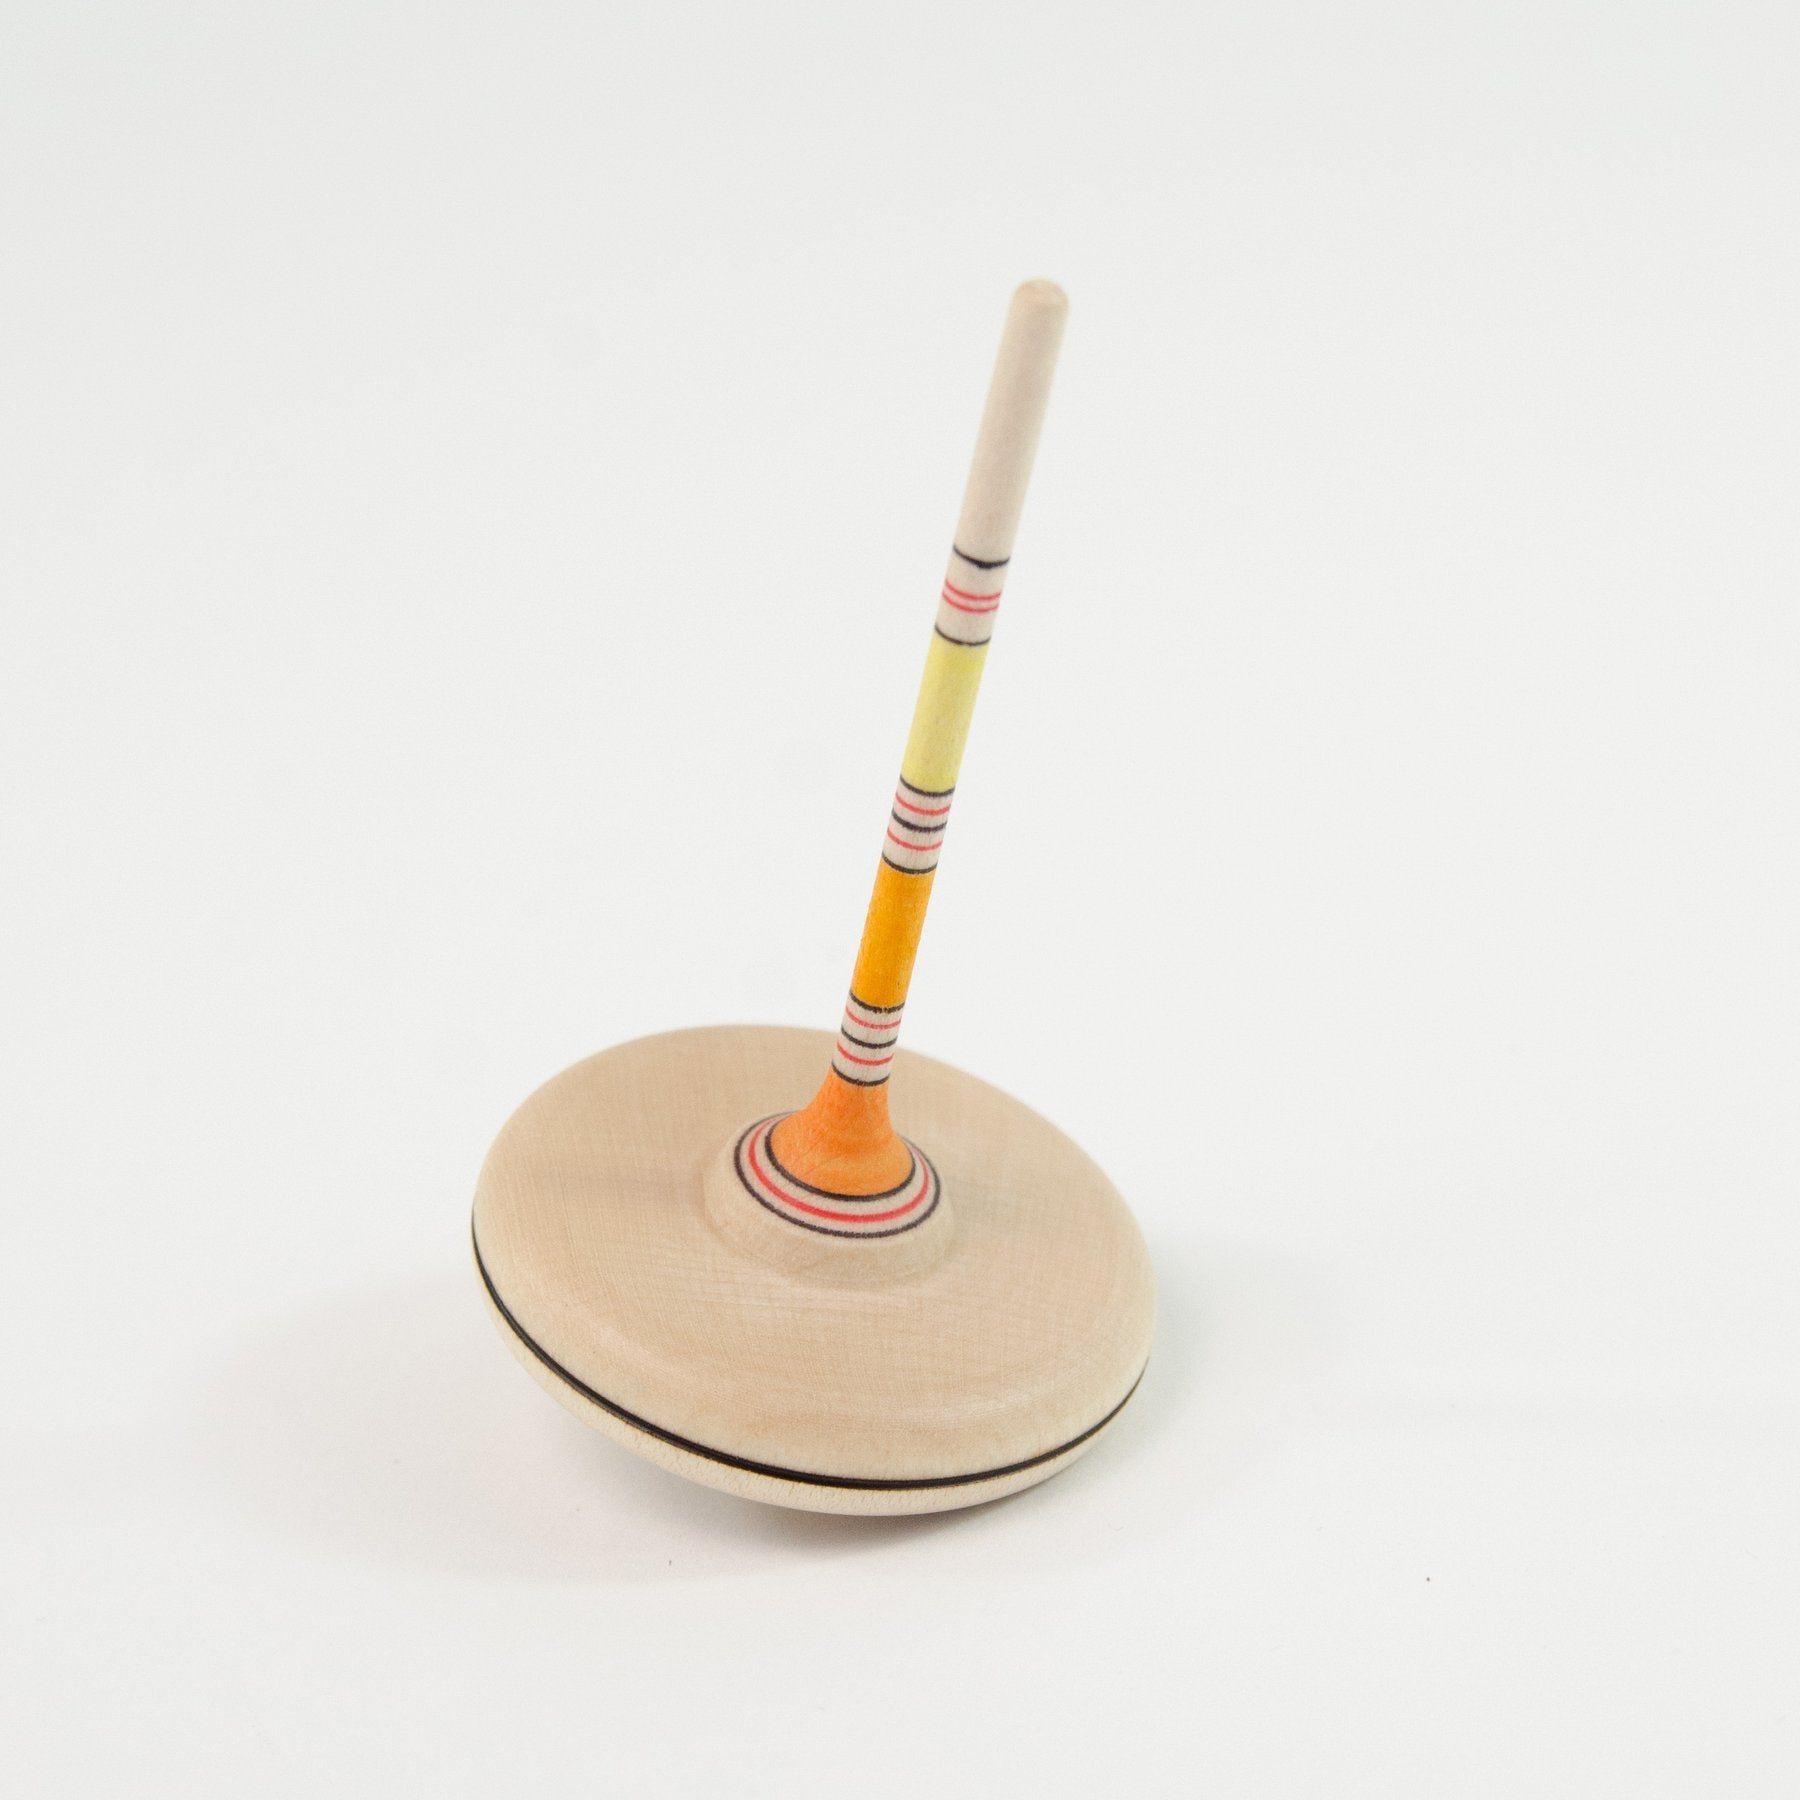 Mader Spaghetti Spinning Top